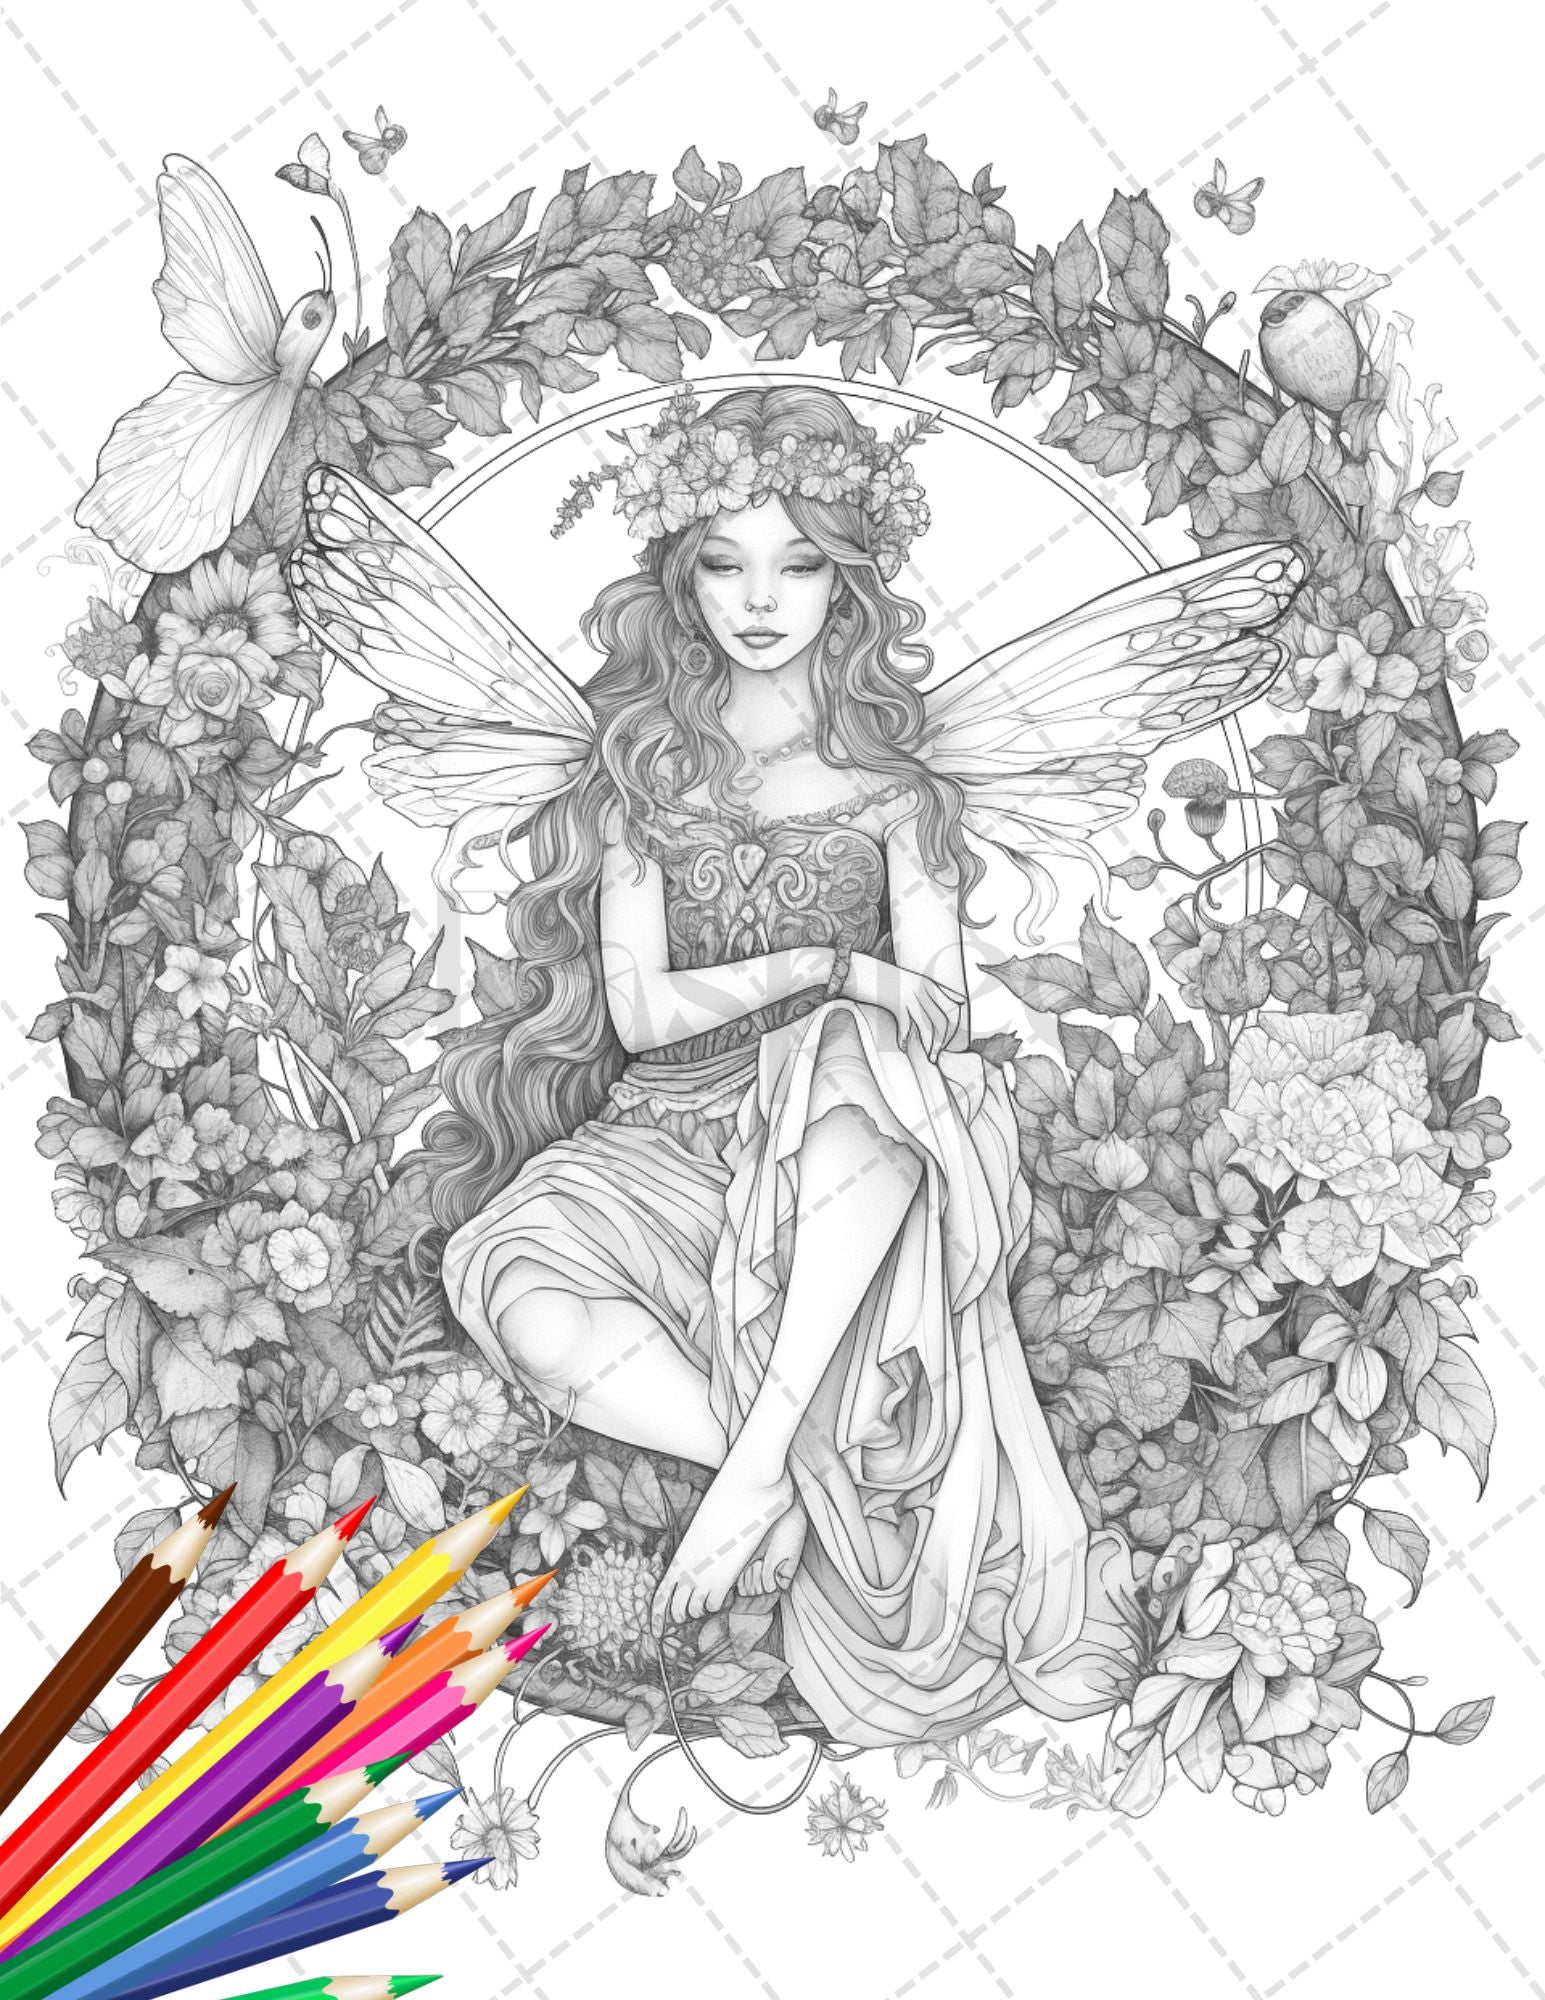 Colouring Books For Adults, Printable, Digital, 10 Complex Sheets